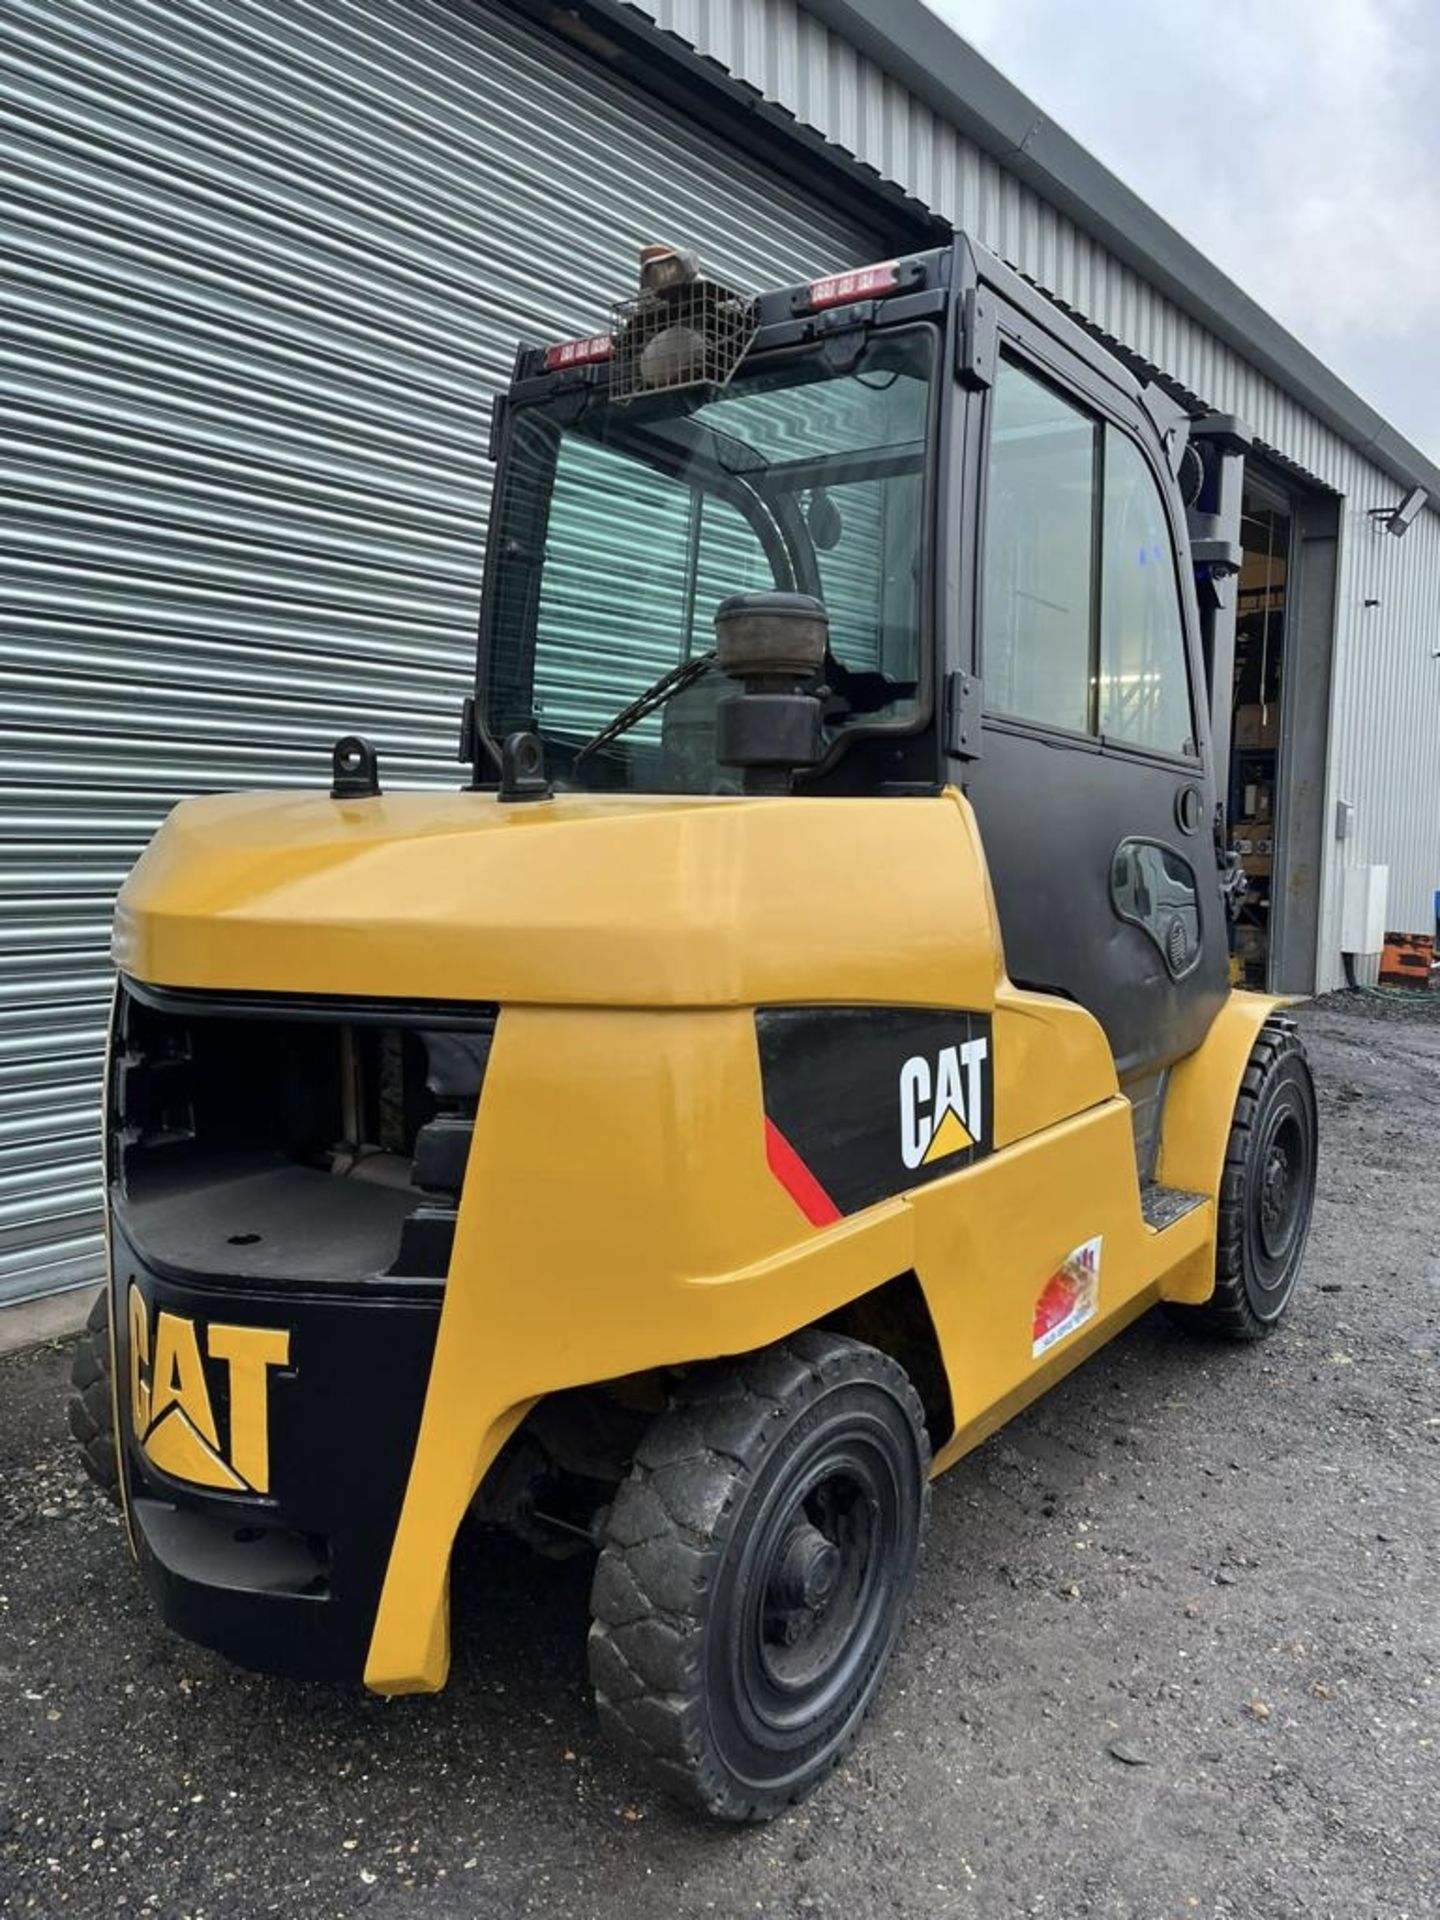 2013 - CATERPILLAR, 5 Tonne Diesel Forklift (New Front Tyres) - Image 9 of 10